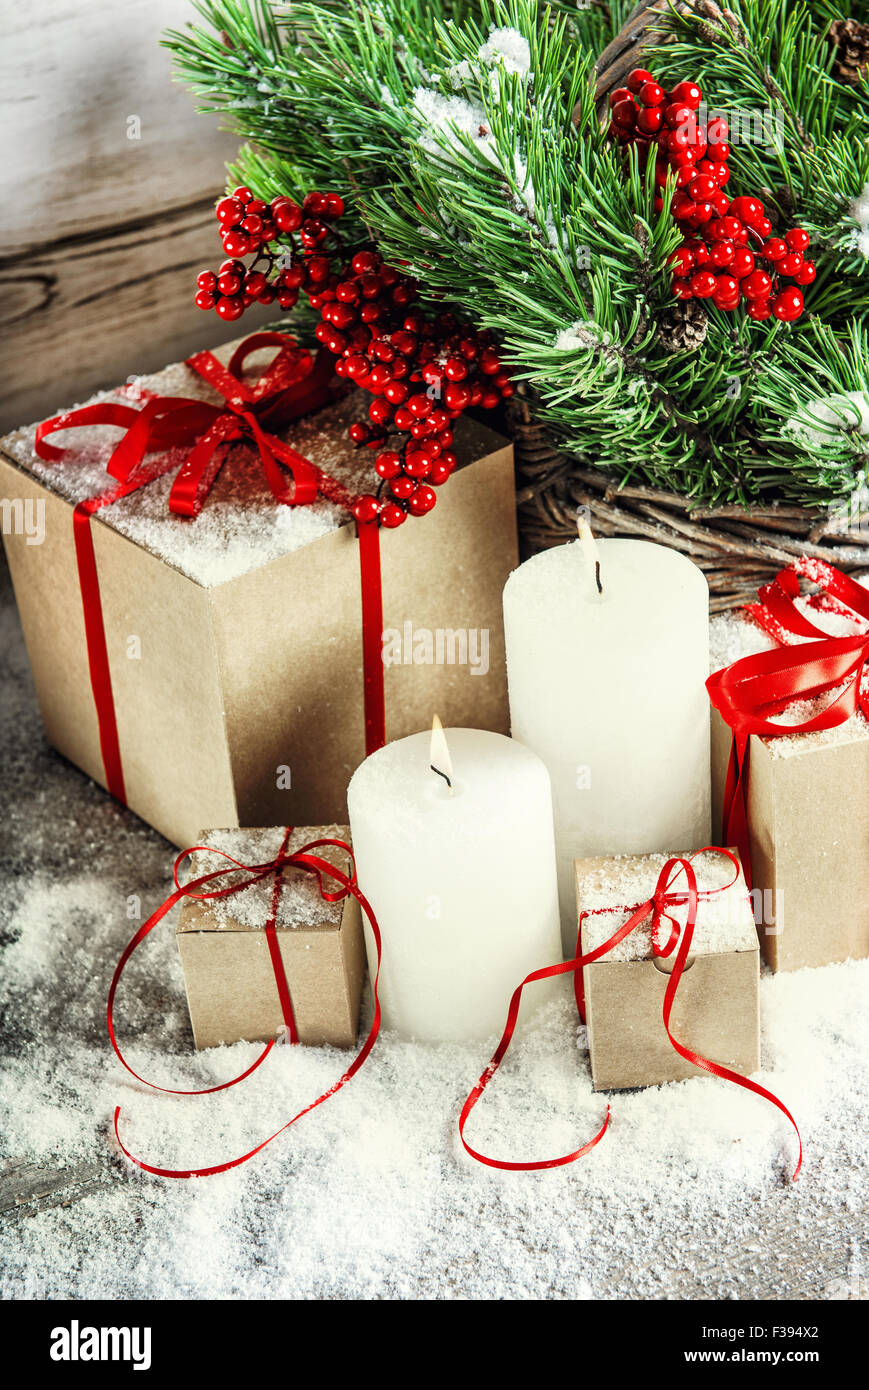 Christmas decoration with burning candles and gift box. Christmas tree branches Stock Photo